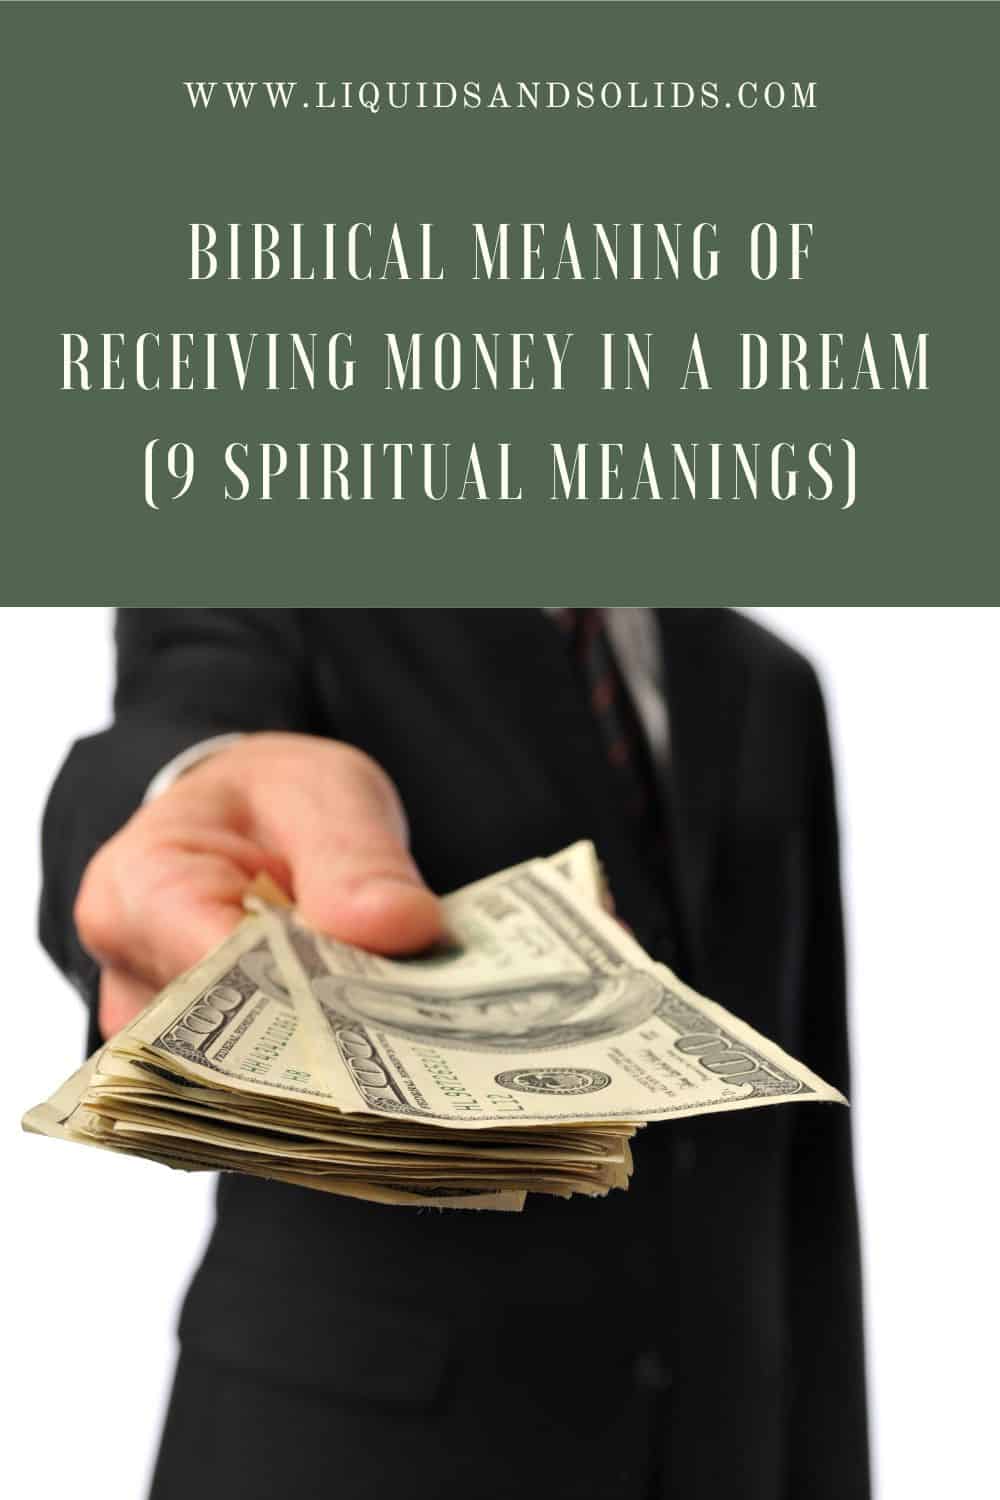 Biblical Meaning of Dreams about Receiving Money